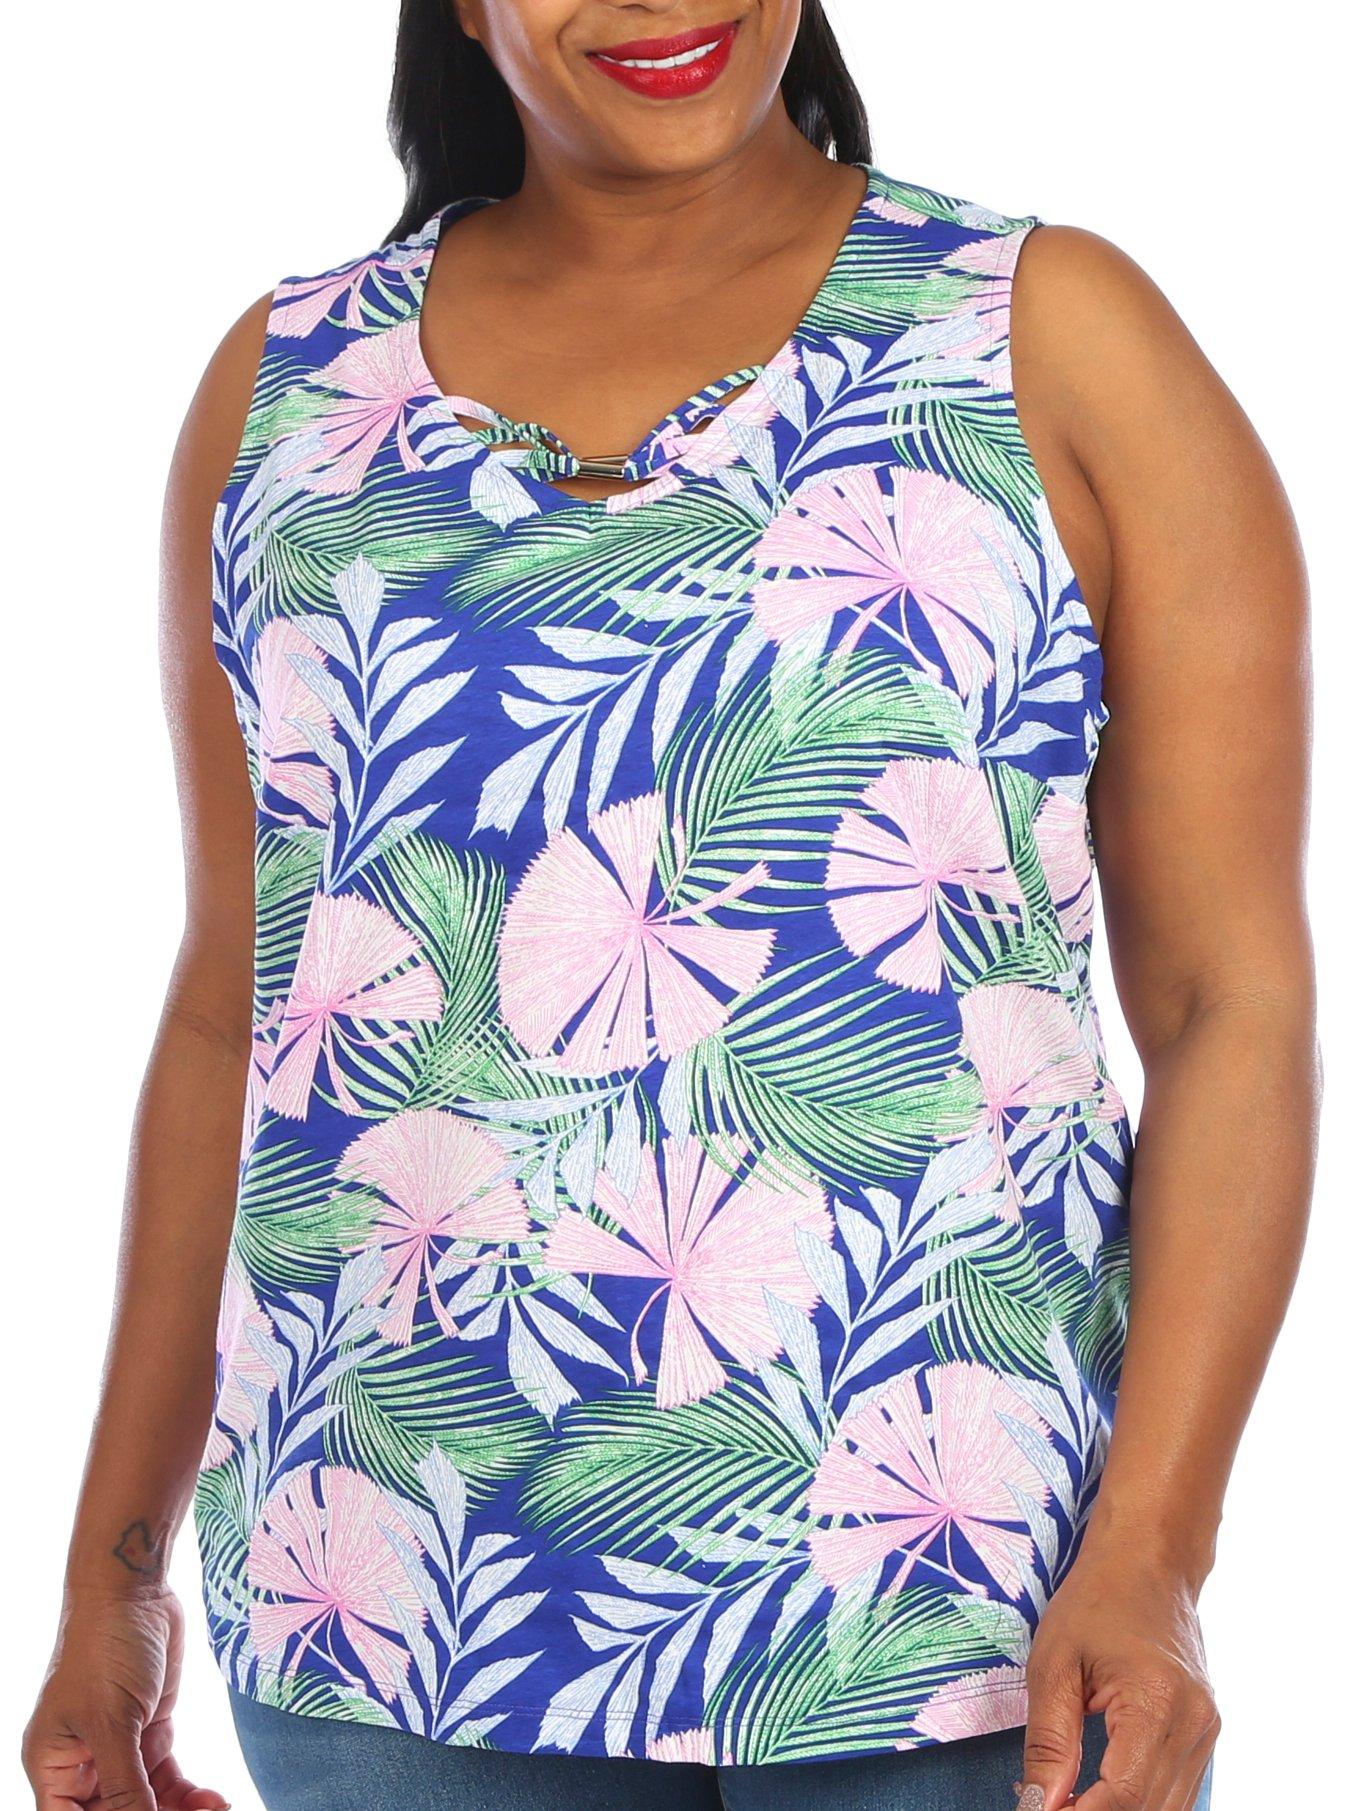 Coral Bay Plus Fronds Print Sleeveless Top